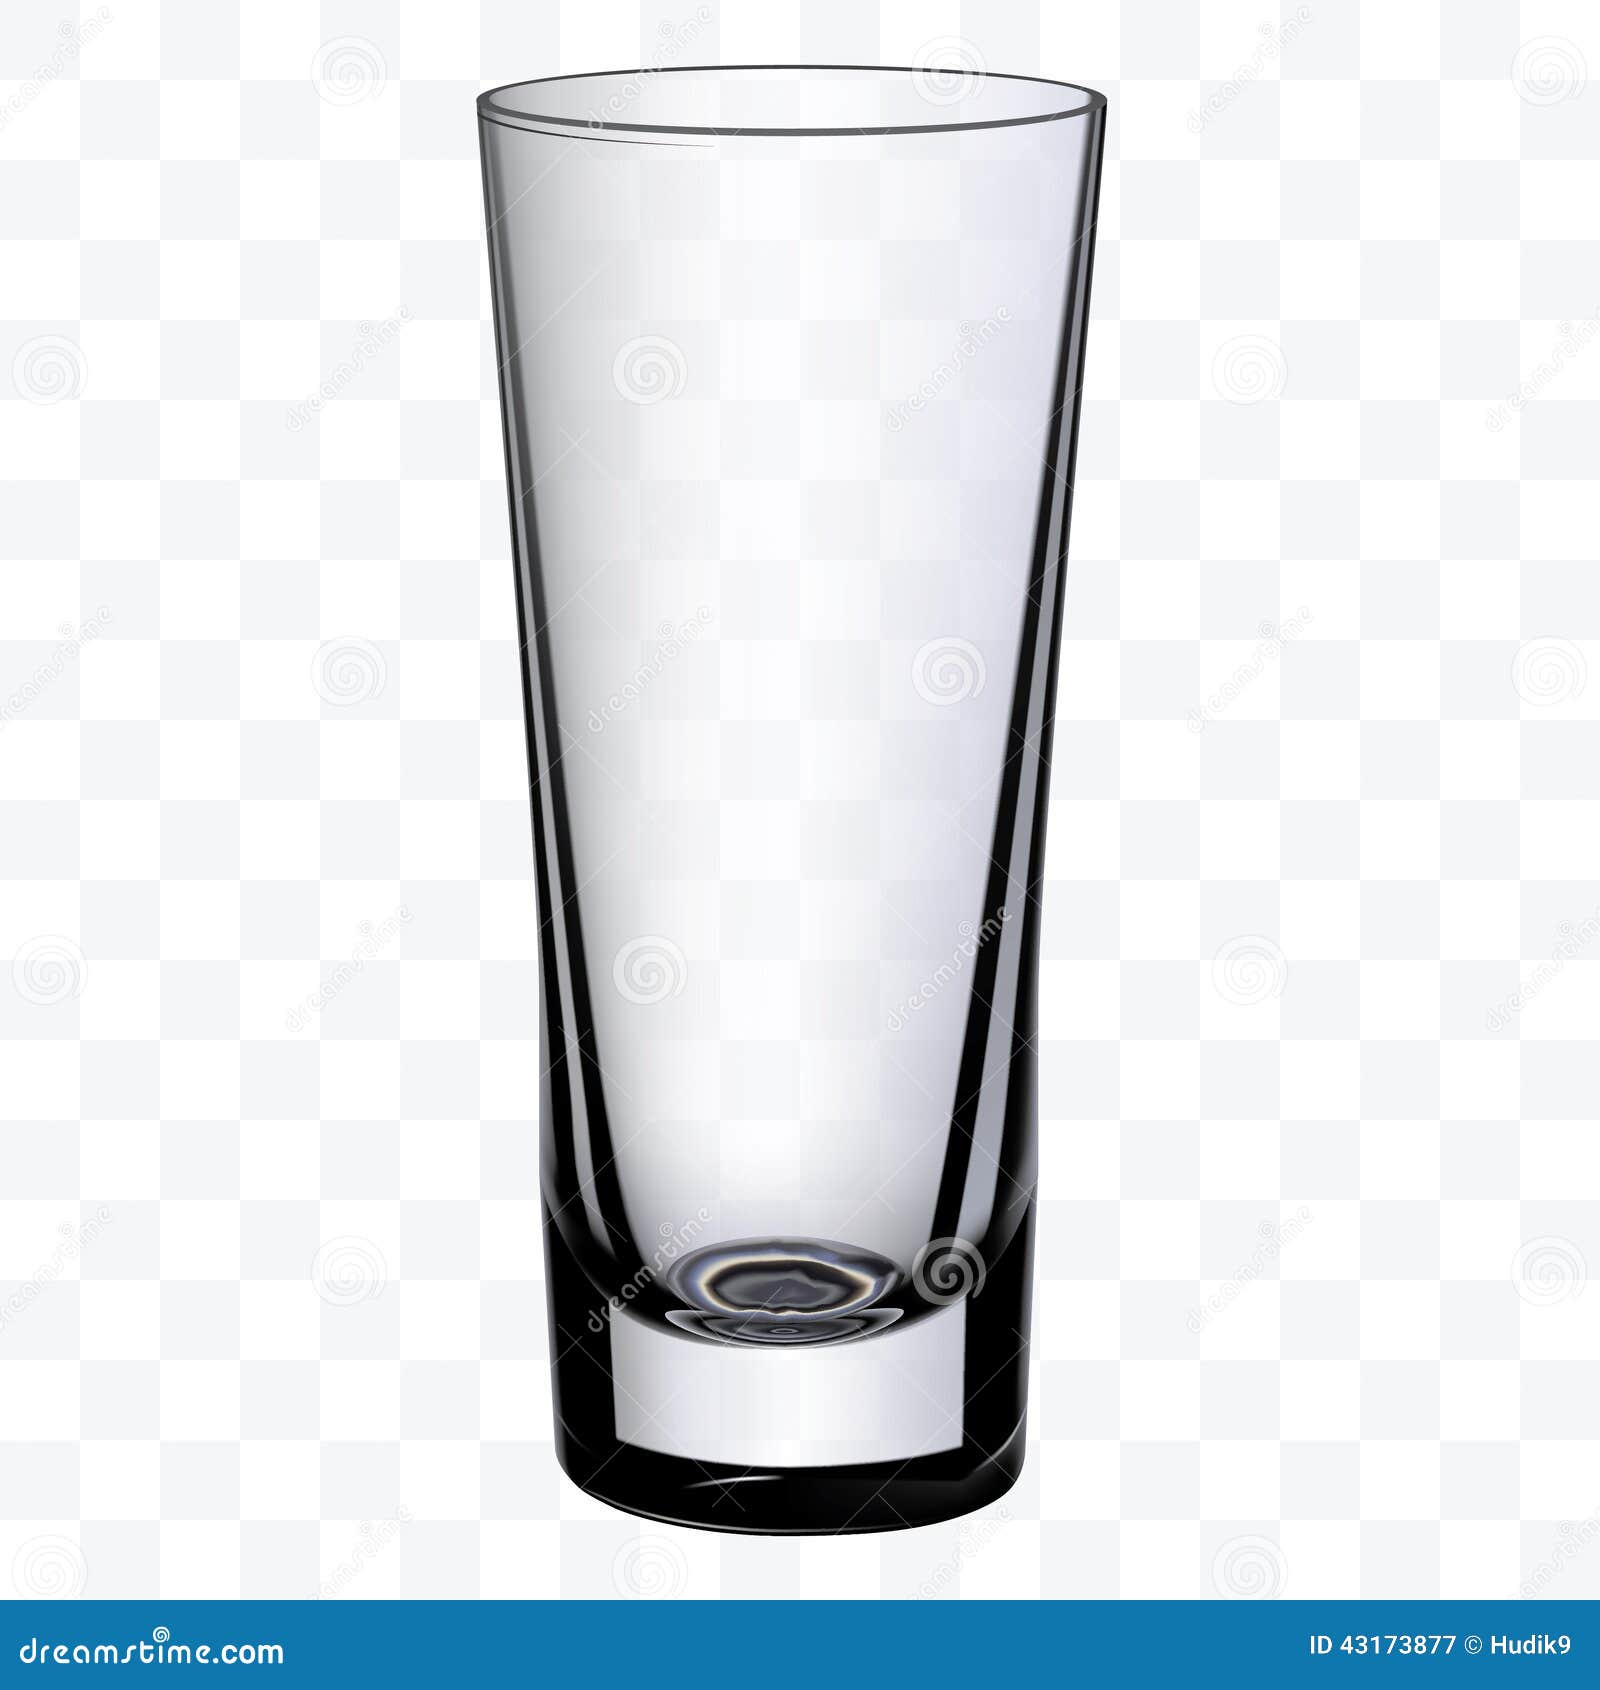 https://thumbs.dreamstime.com/z/transparent-empty-drinking-glass-cup-43173877.jpg